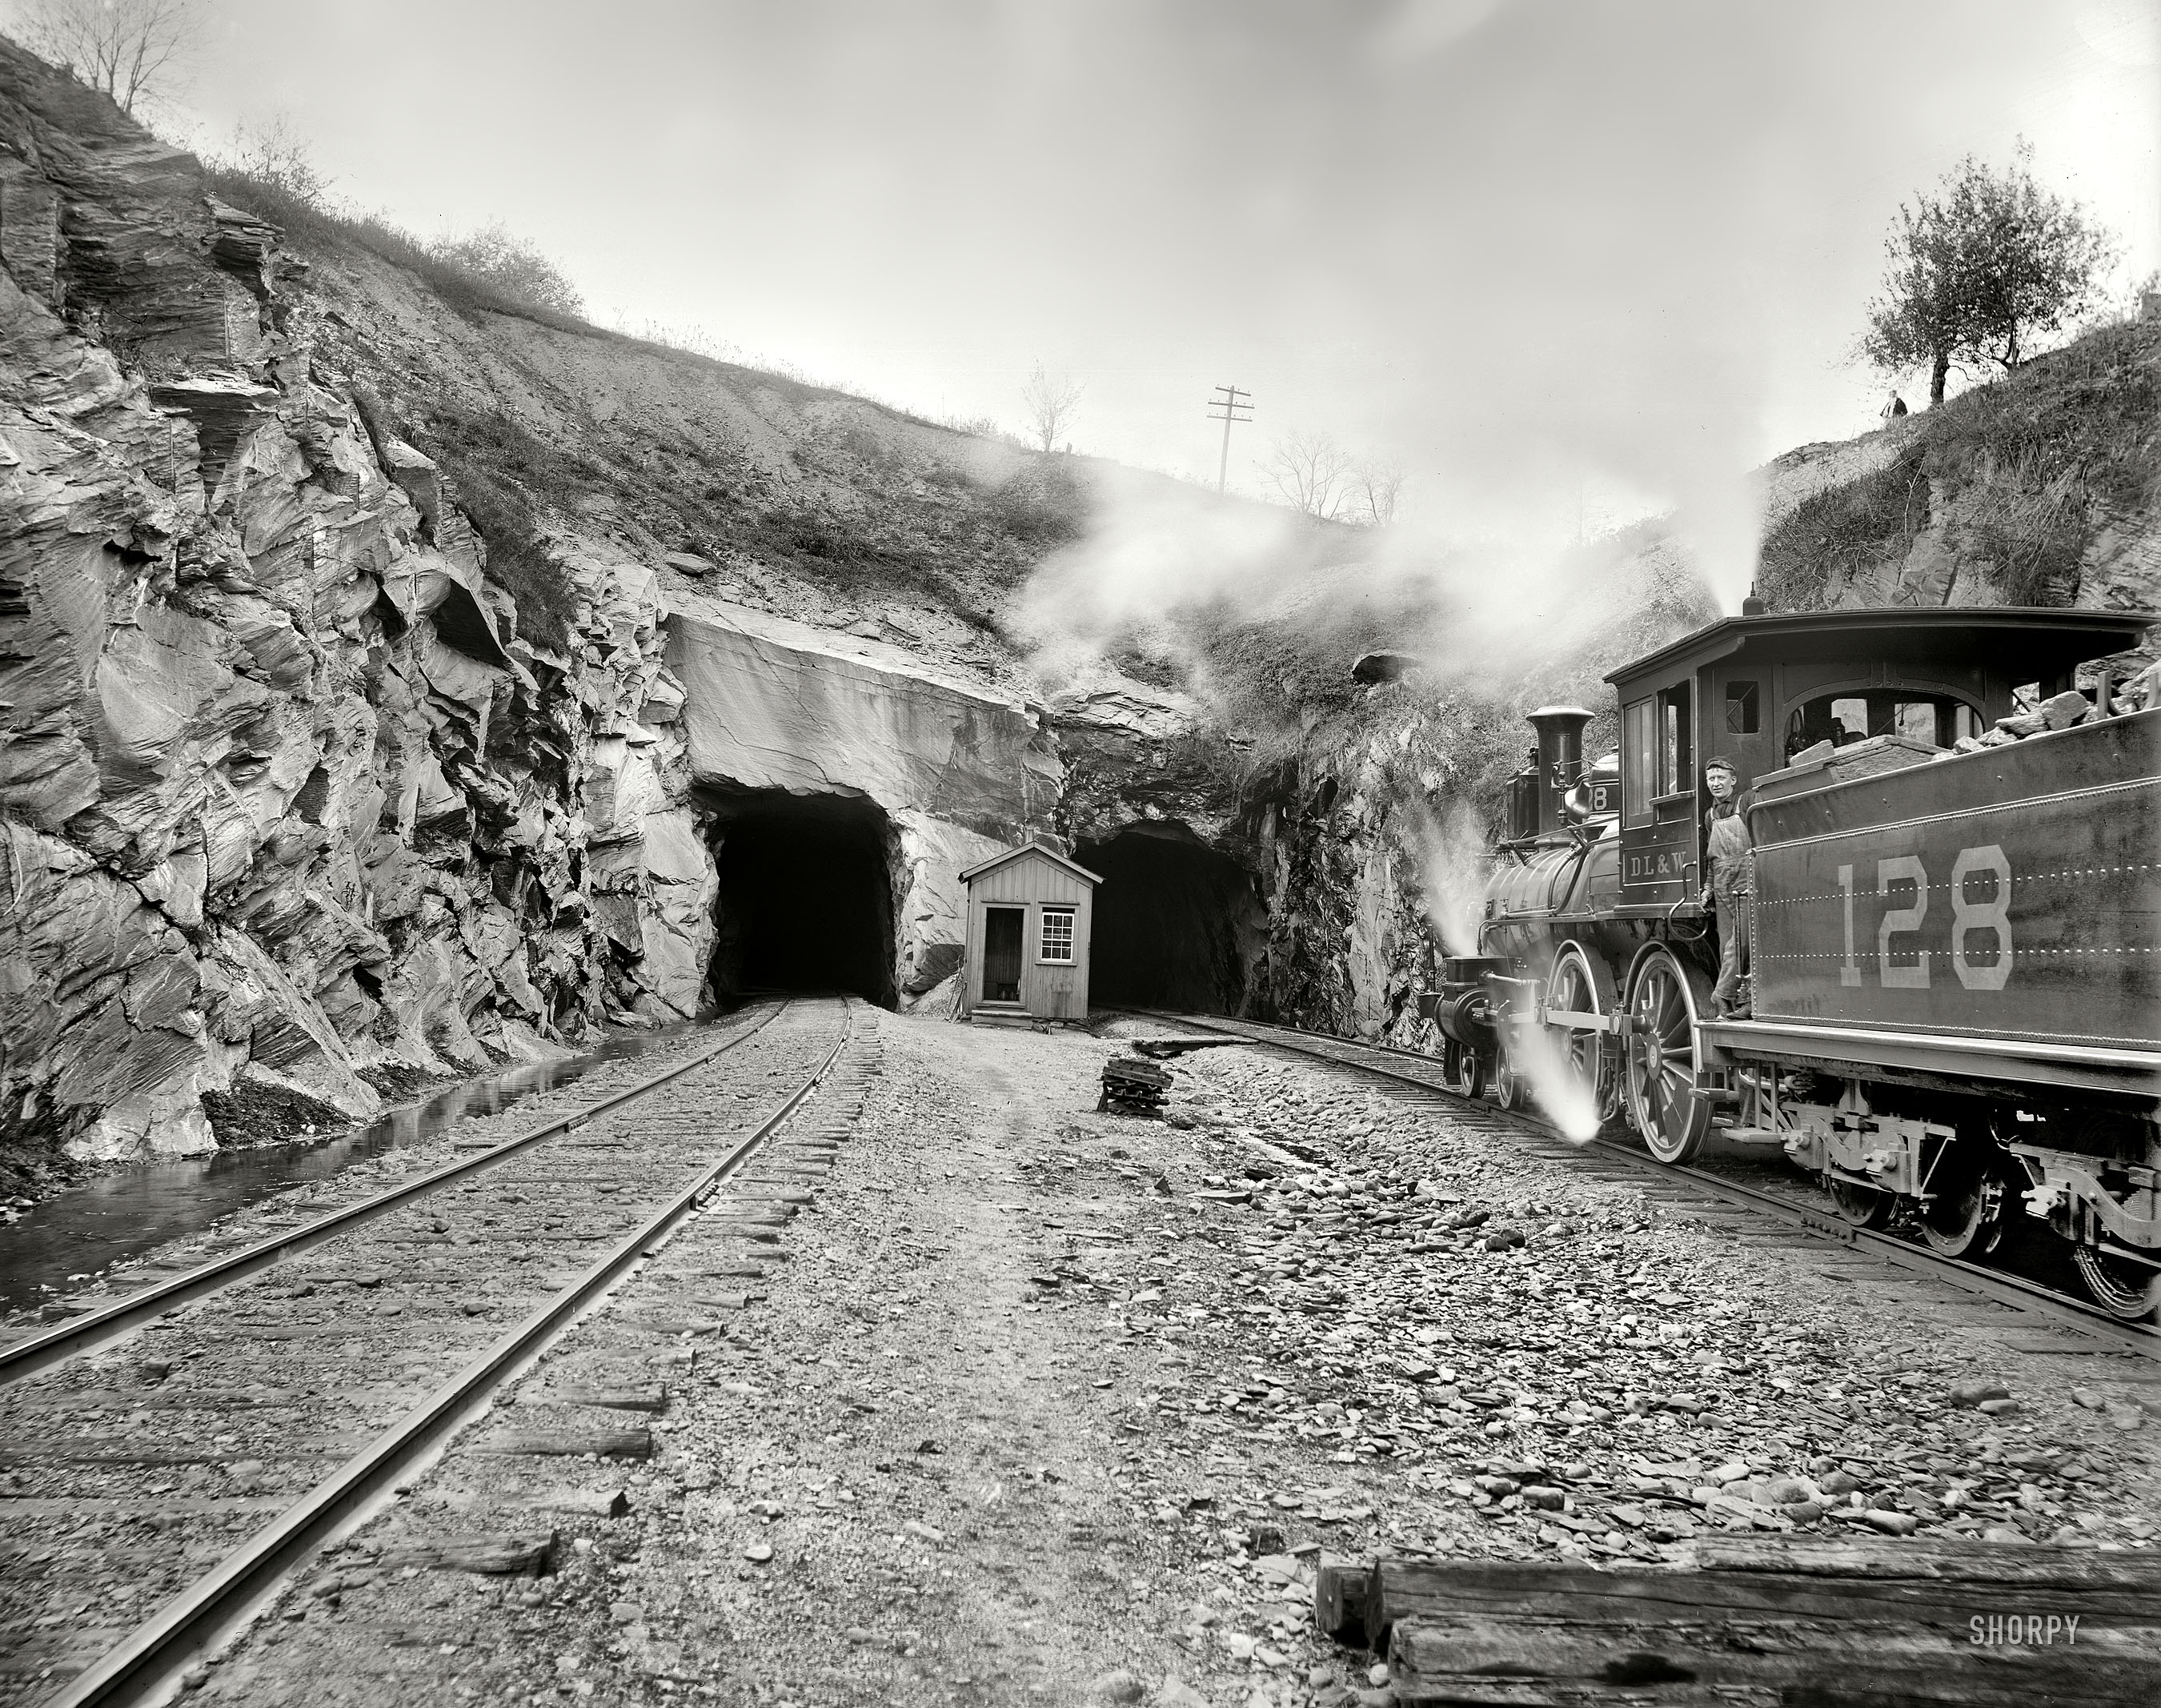 Warren County, New Jersey, circa 1900. "Manunka Chunk, east end of tunnel." 8x10 inch dry plate glass negative, Detroit Publishing Company. View full size.